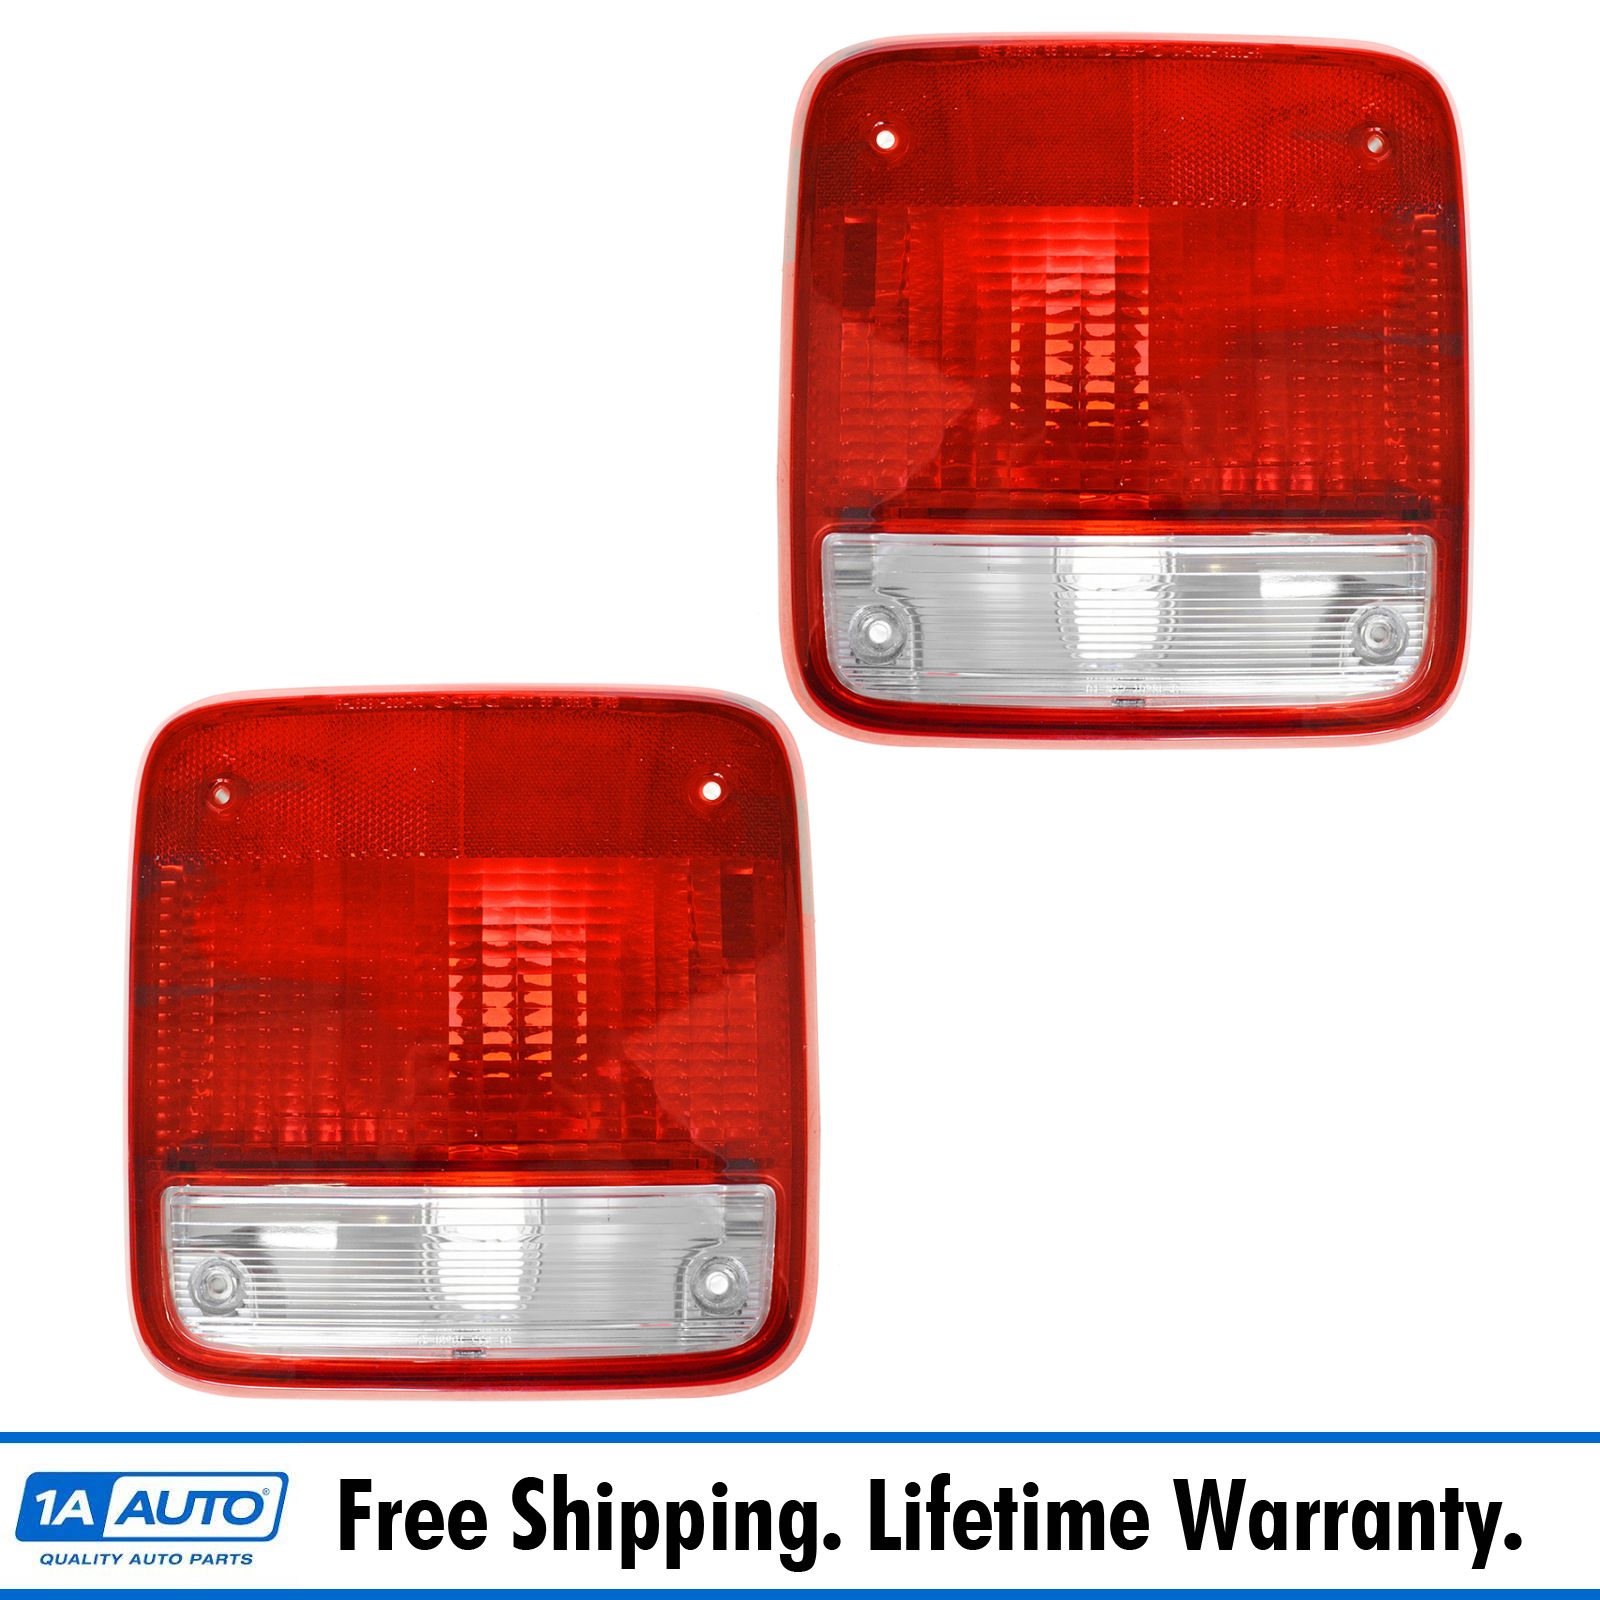 Auto Parts & Accessories Taillights Taillamps Rear Brake Lights Lamps Pair Set for 95-96 Toyota 1995 Toyota Camry Brake Light Bulb Replacement